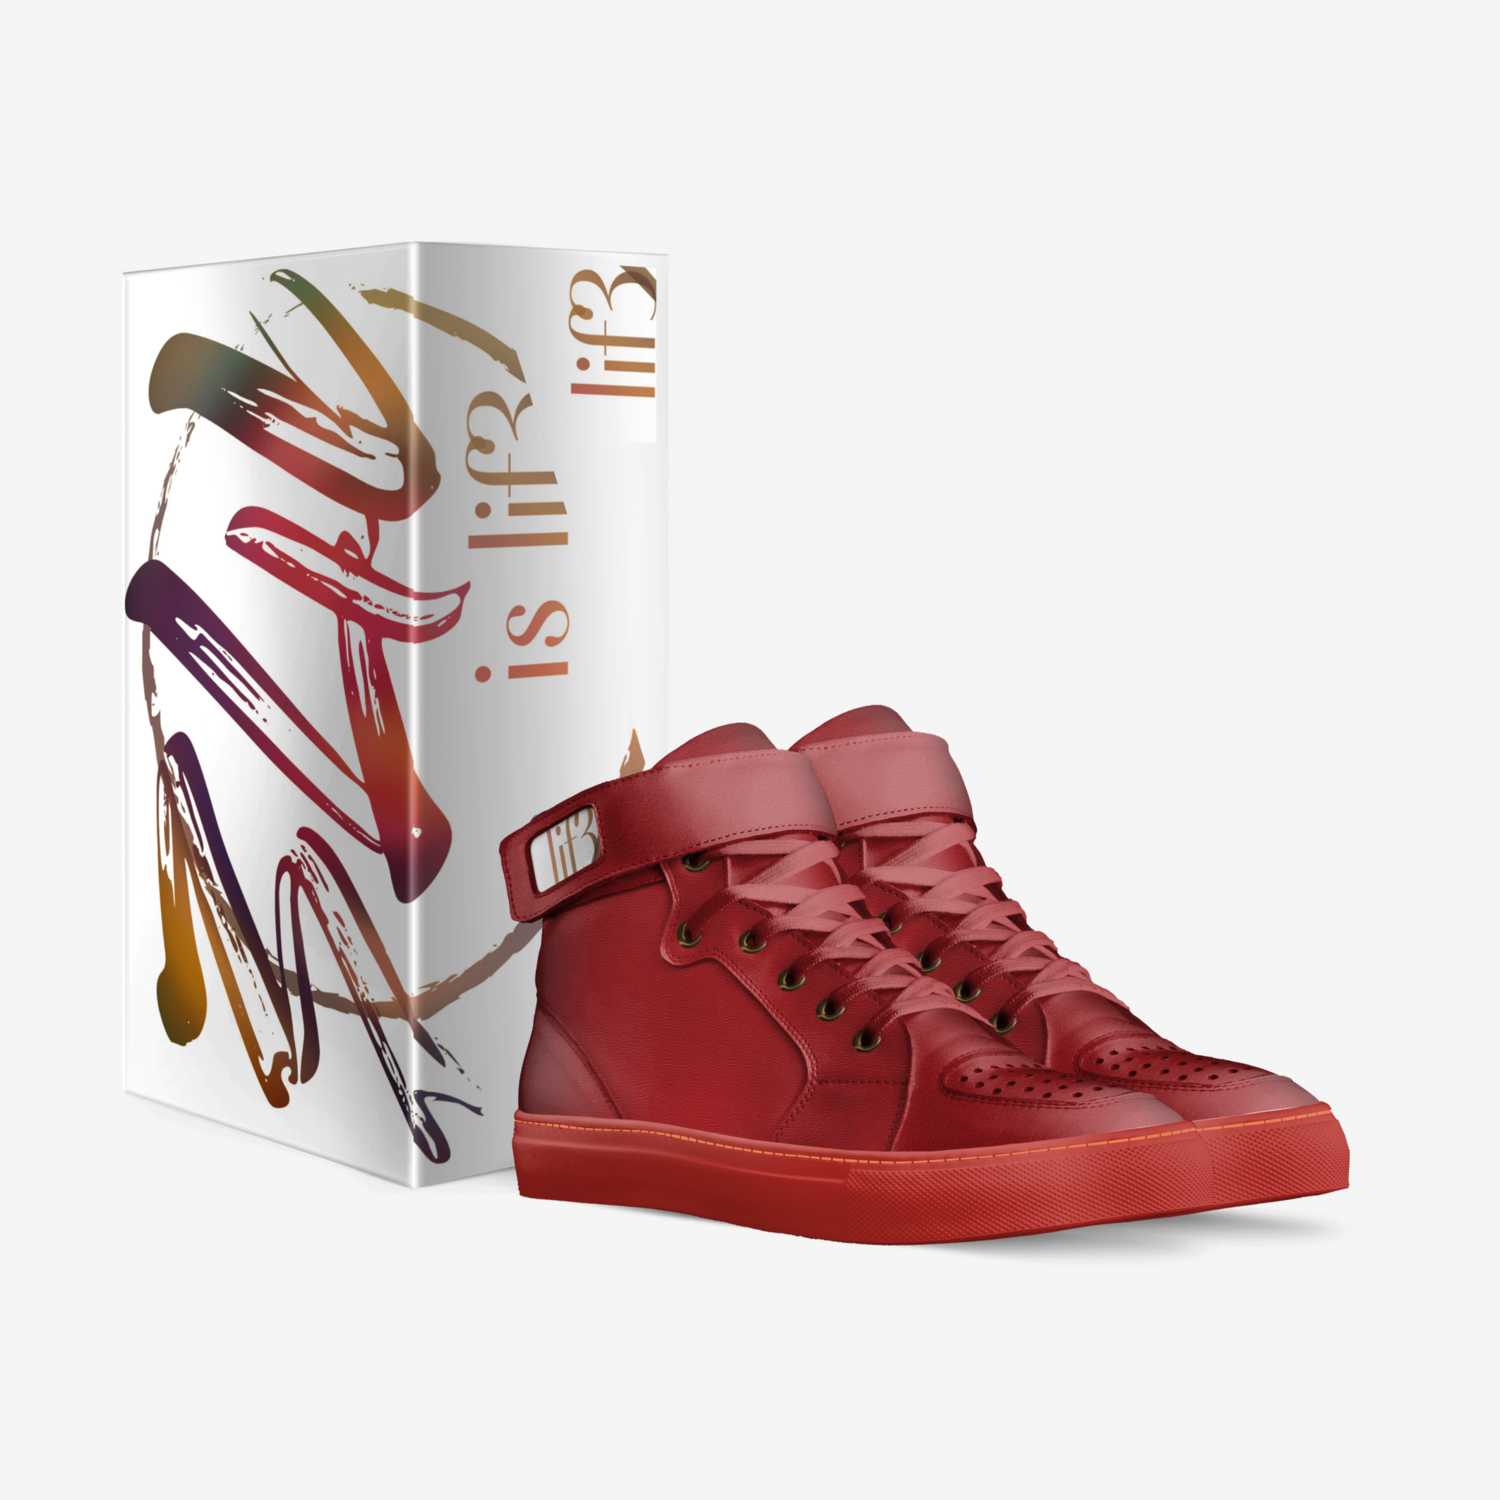 lif3-1 custom made in Italy shoes by Wendell Miller | Box view